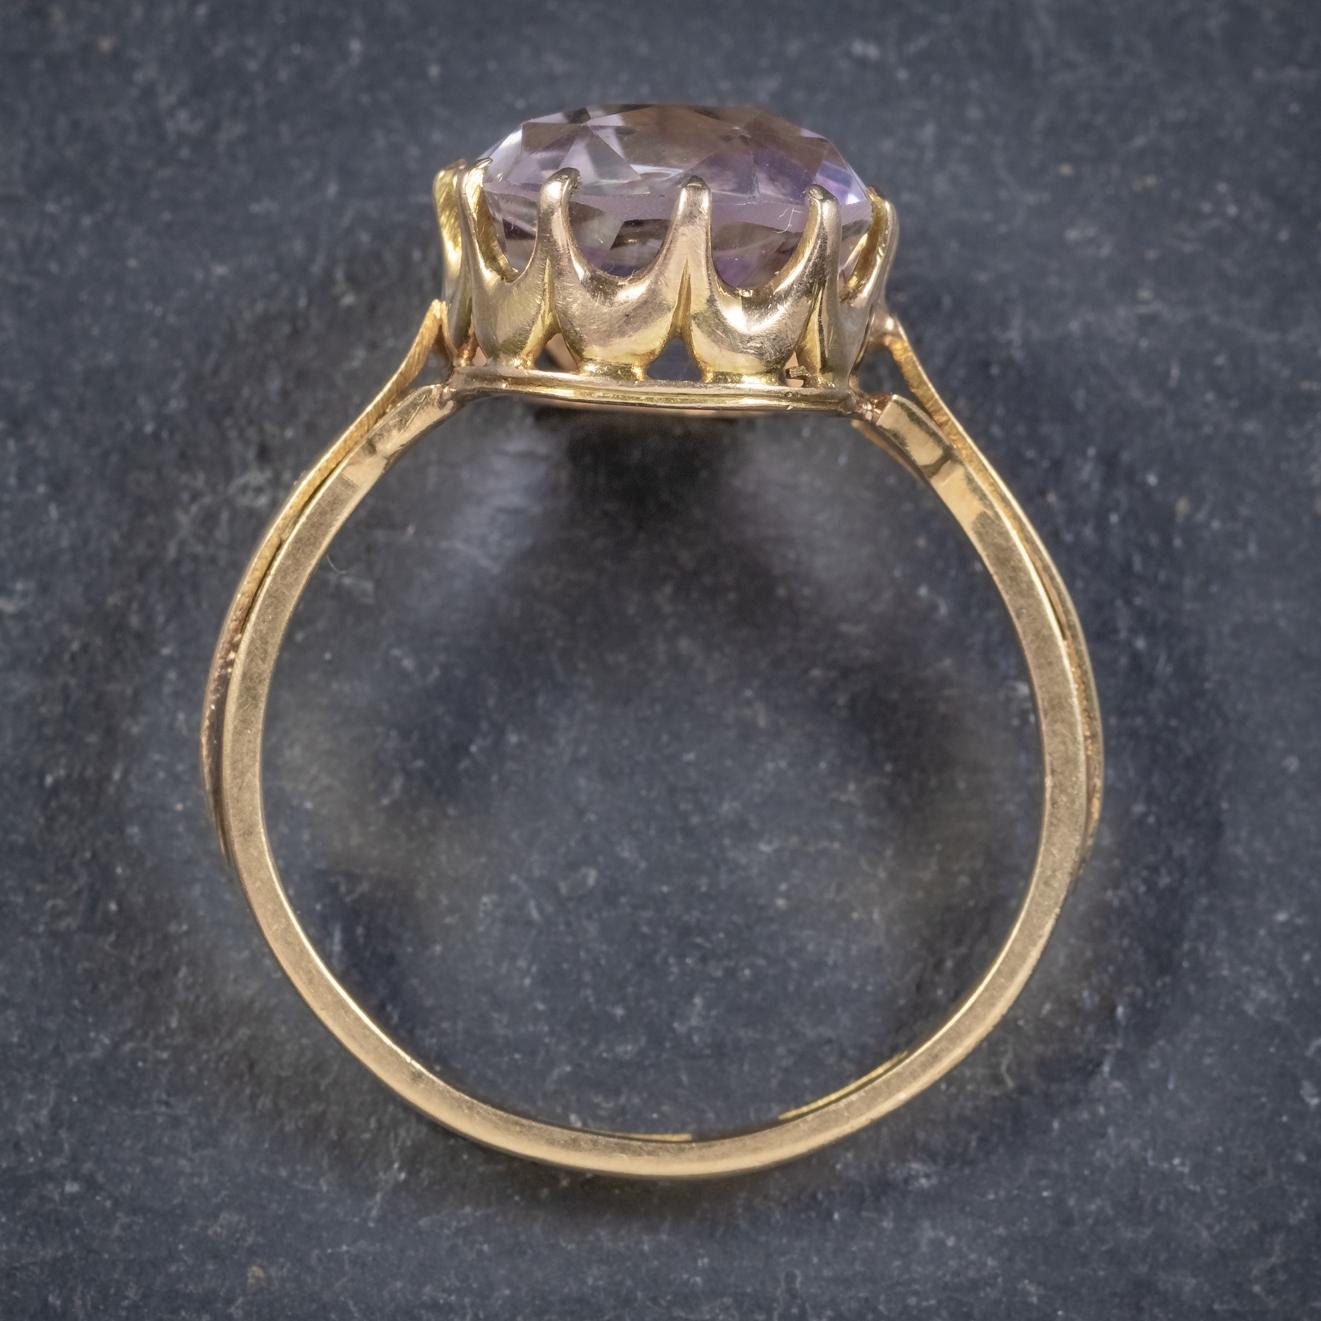 Antique Victorian Purple Spinel 18 Carat Gold 5 Carat Spinel, circa 1900 Ring For Sale 3